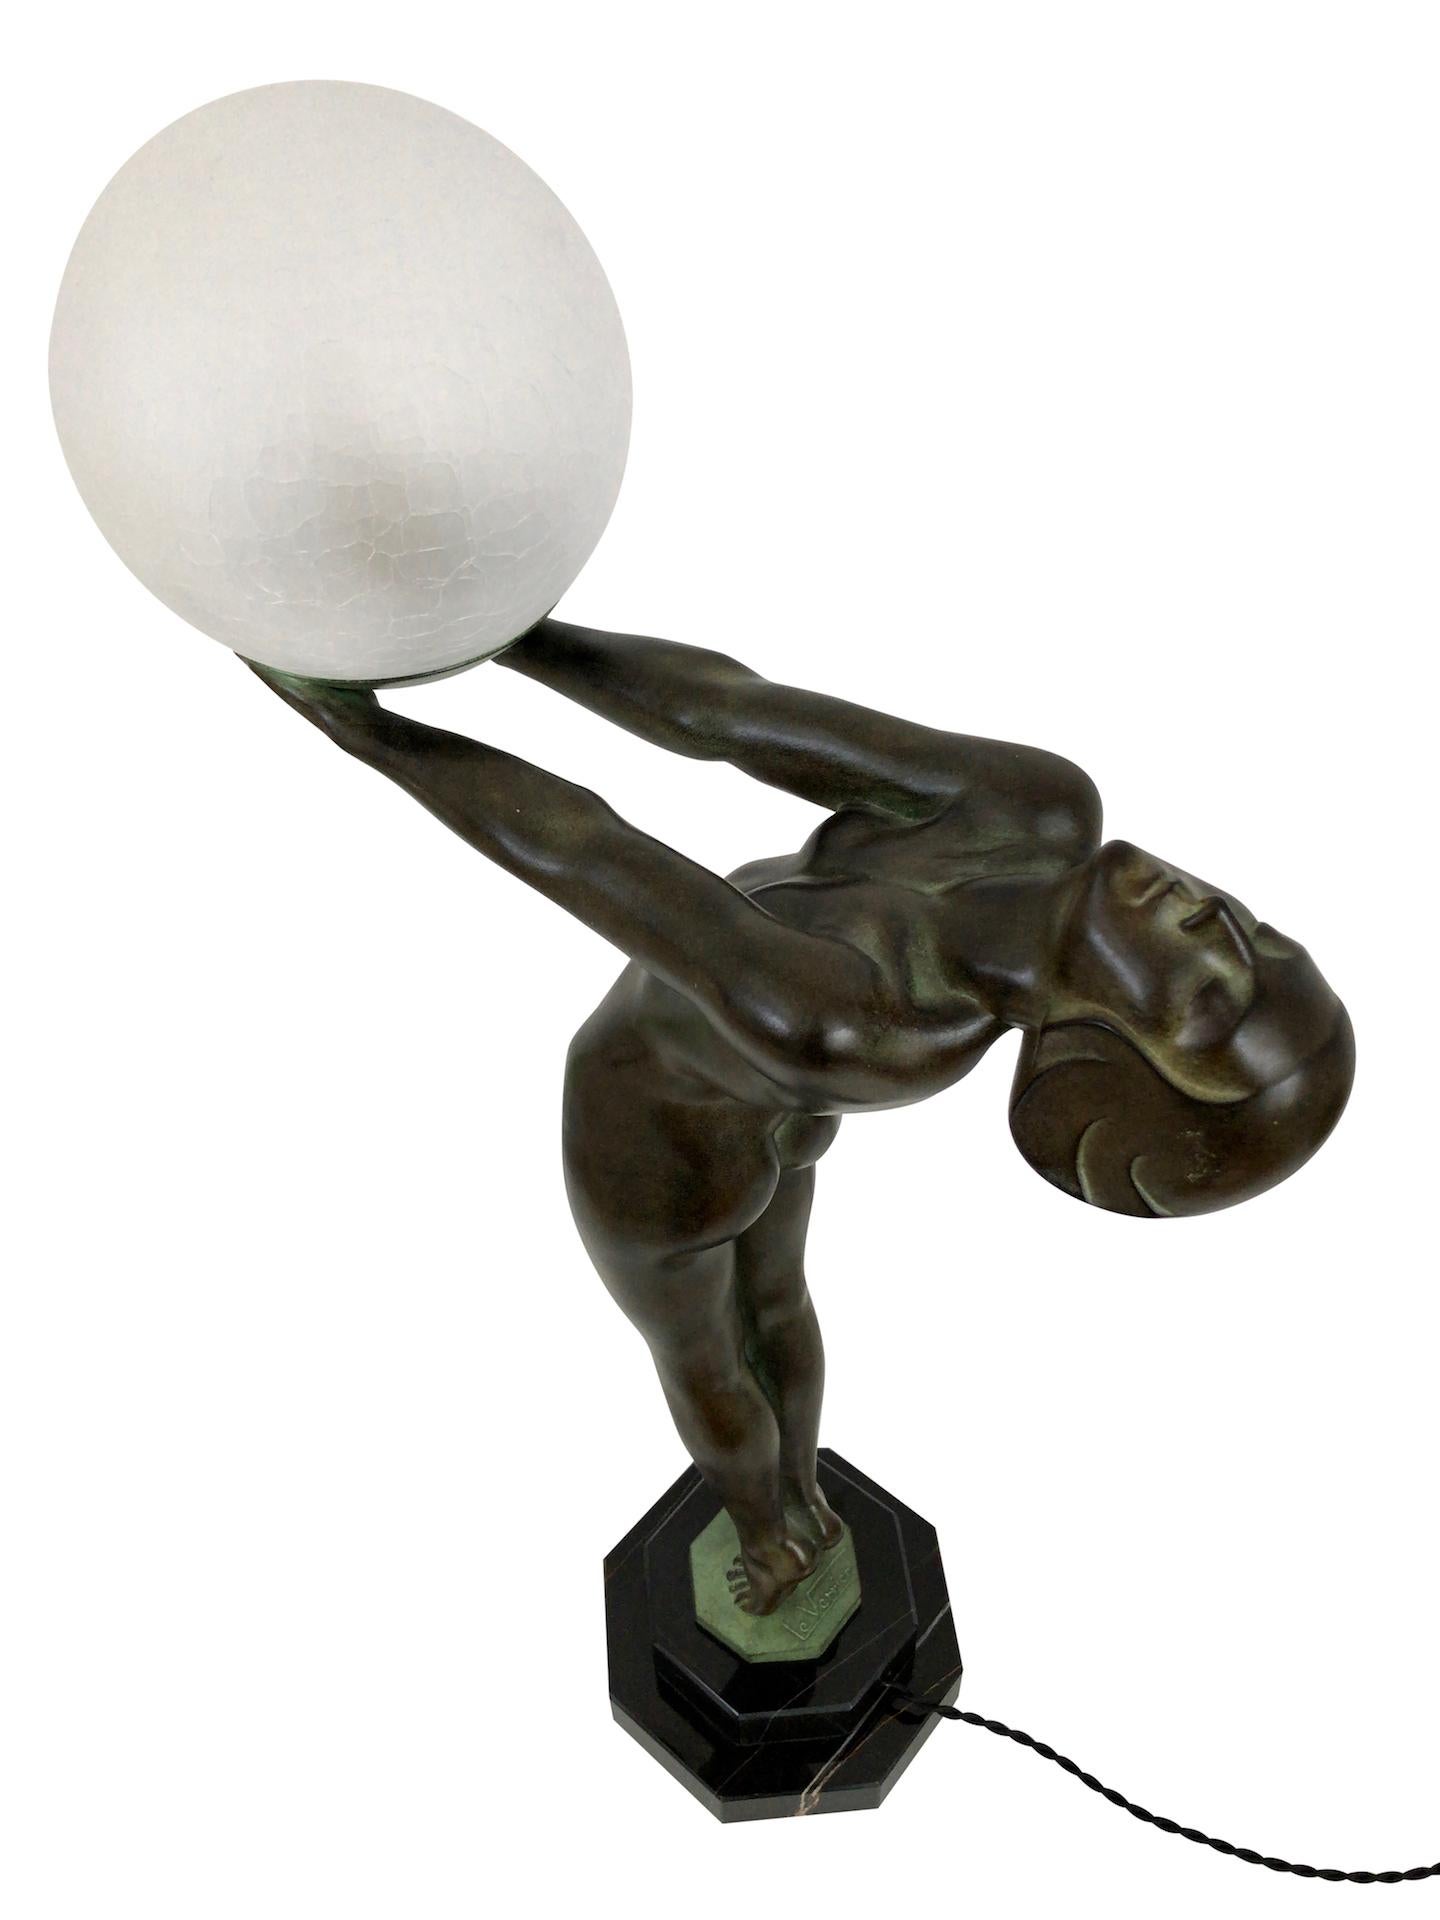 Contemporary Art Deco Lumina Sculpture Clarté Lamp Nude Dancer with a Ball by Max Le Verrier For Sale